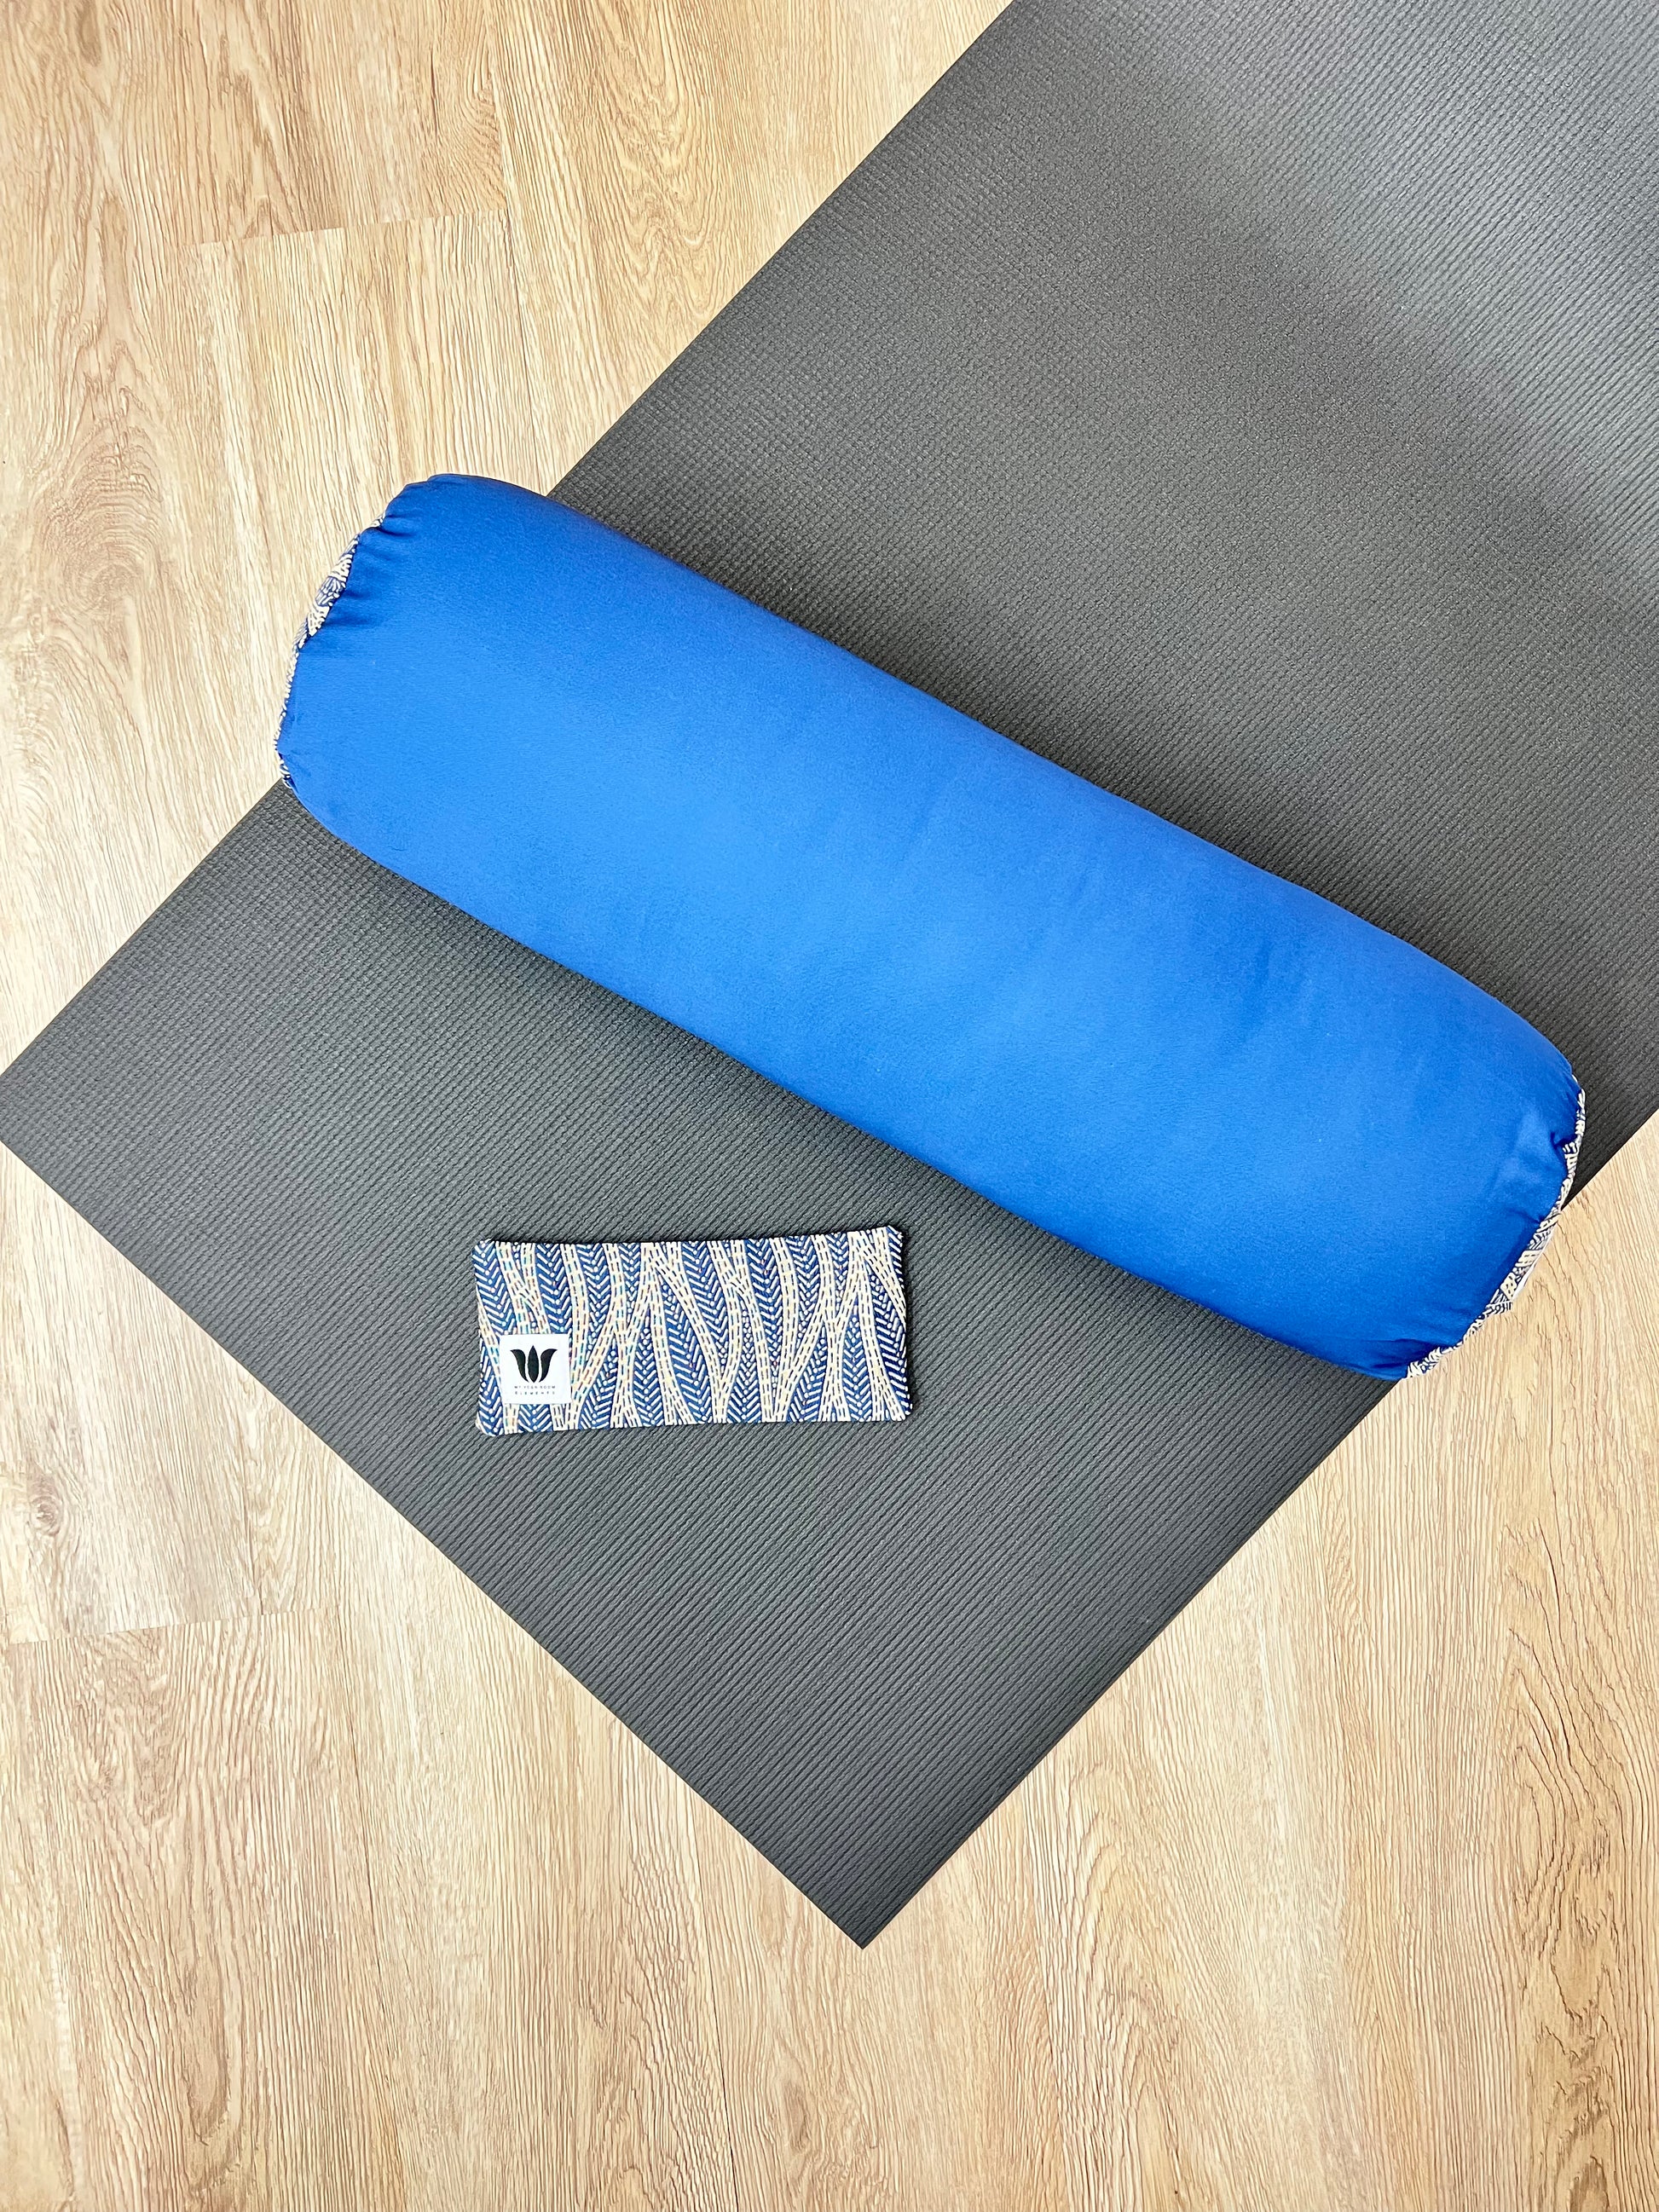 Round Yoga Bolster with matching eye pillow  Blue in Color, Handcrafted in Canada